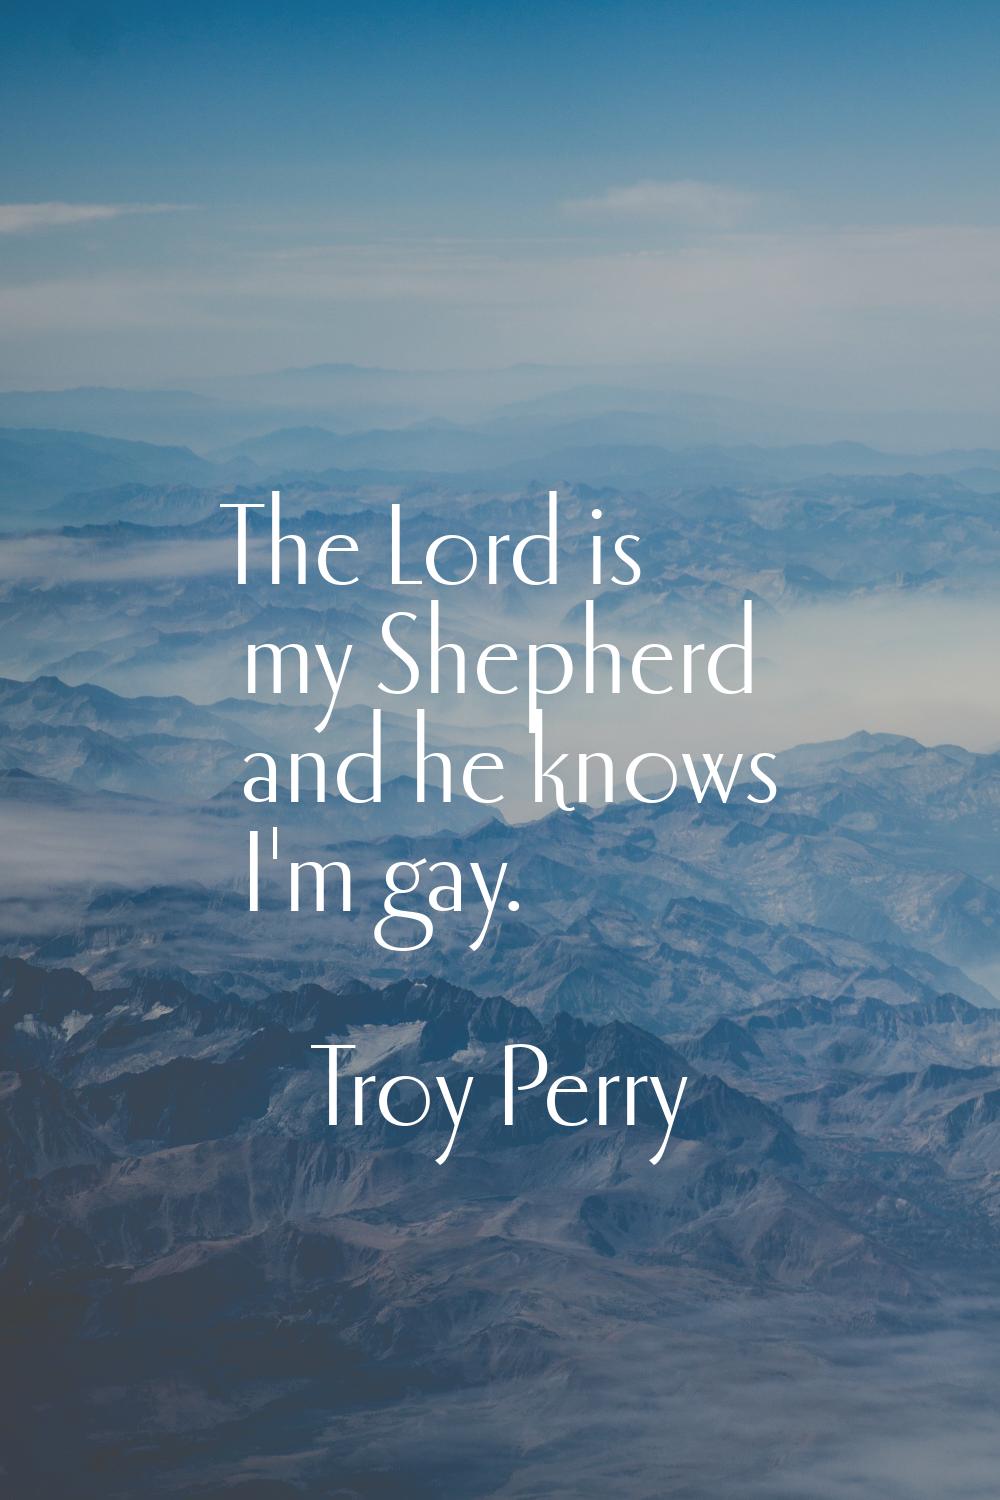 The Lord is my Shepherd and he knows I'm gay.